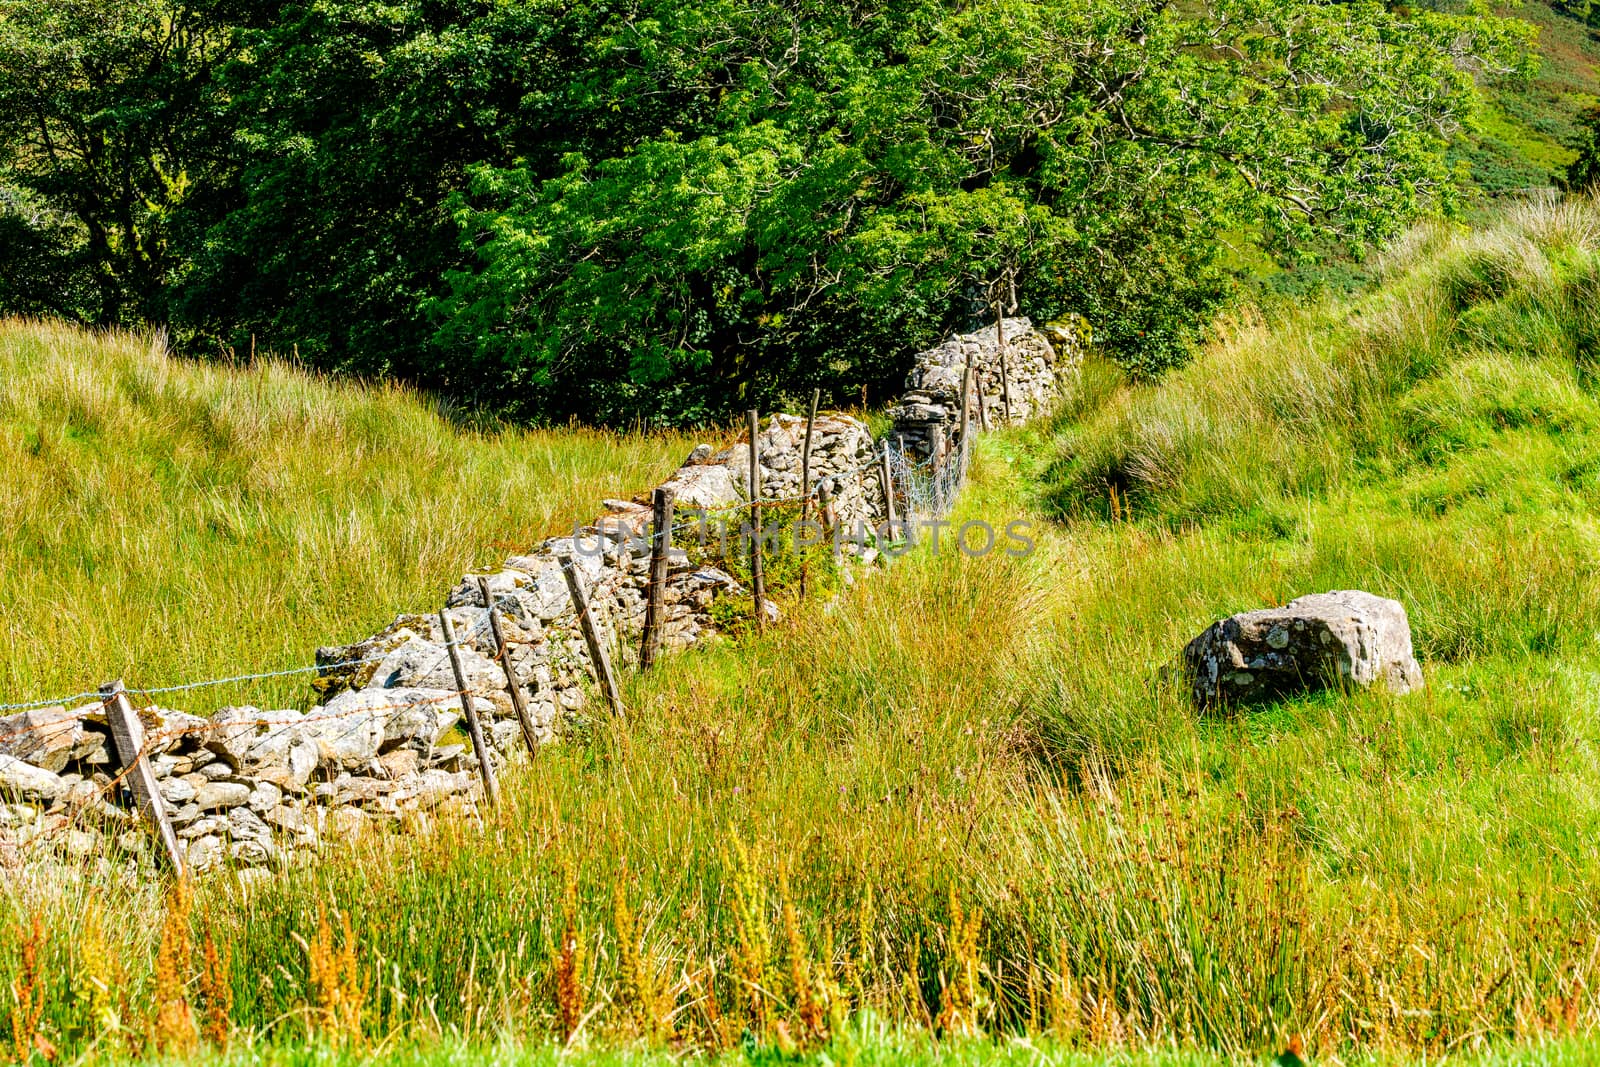 Typical dry stone wall in the countryside of The Lake District UK by paddythegolfer